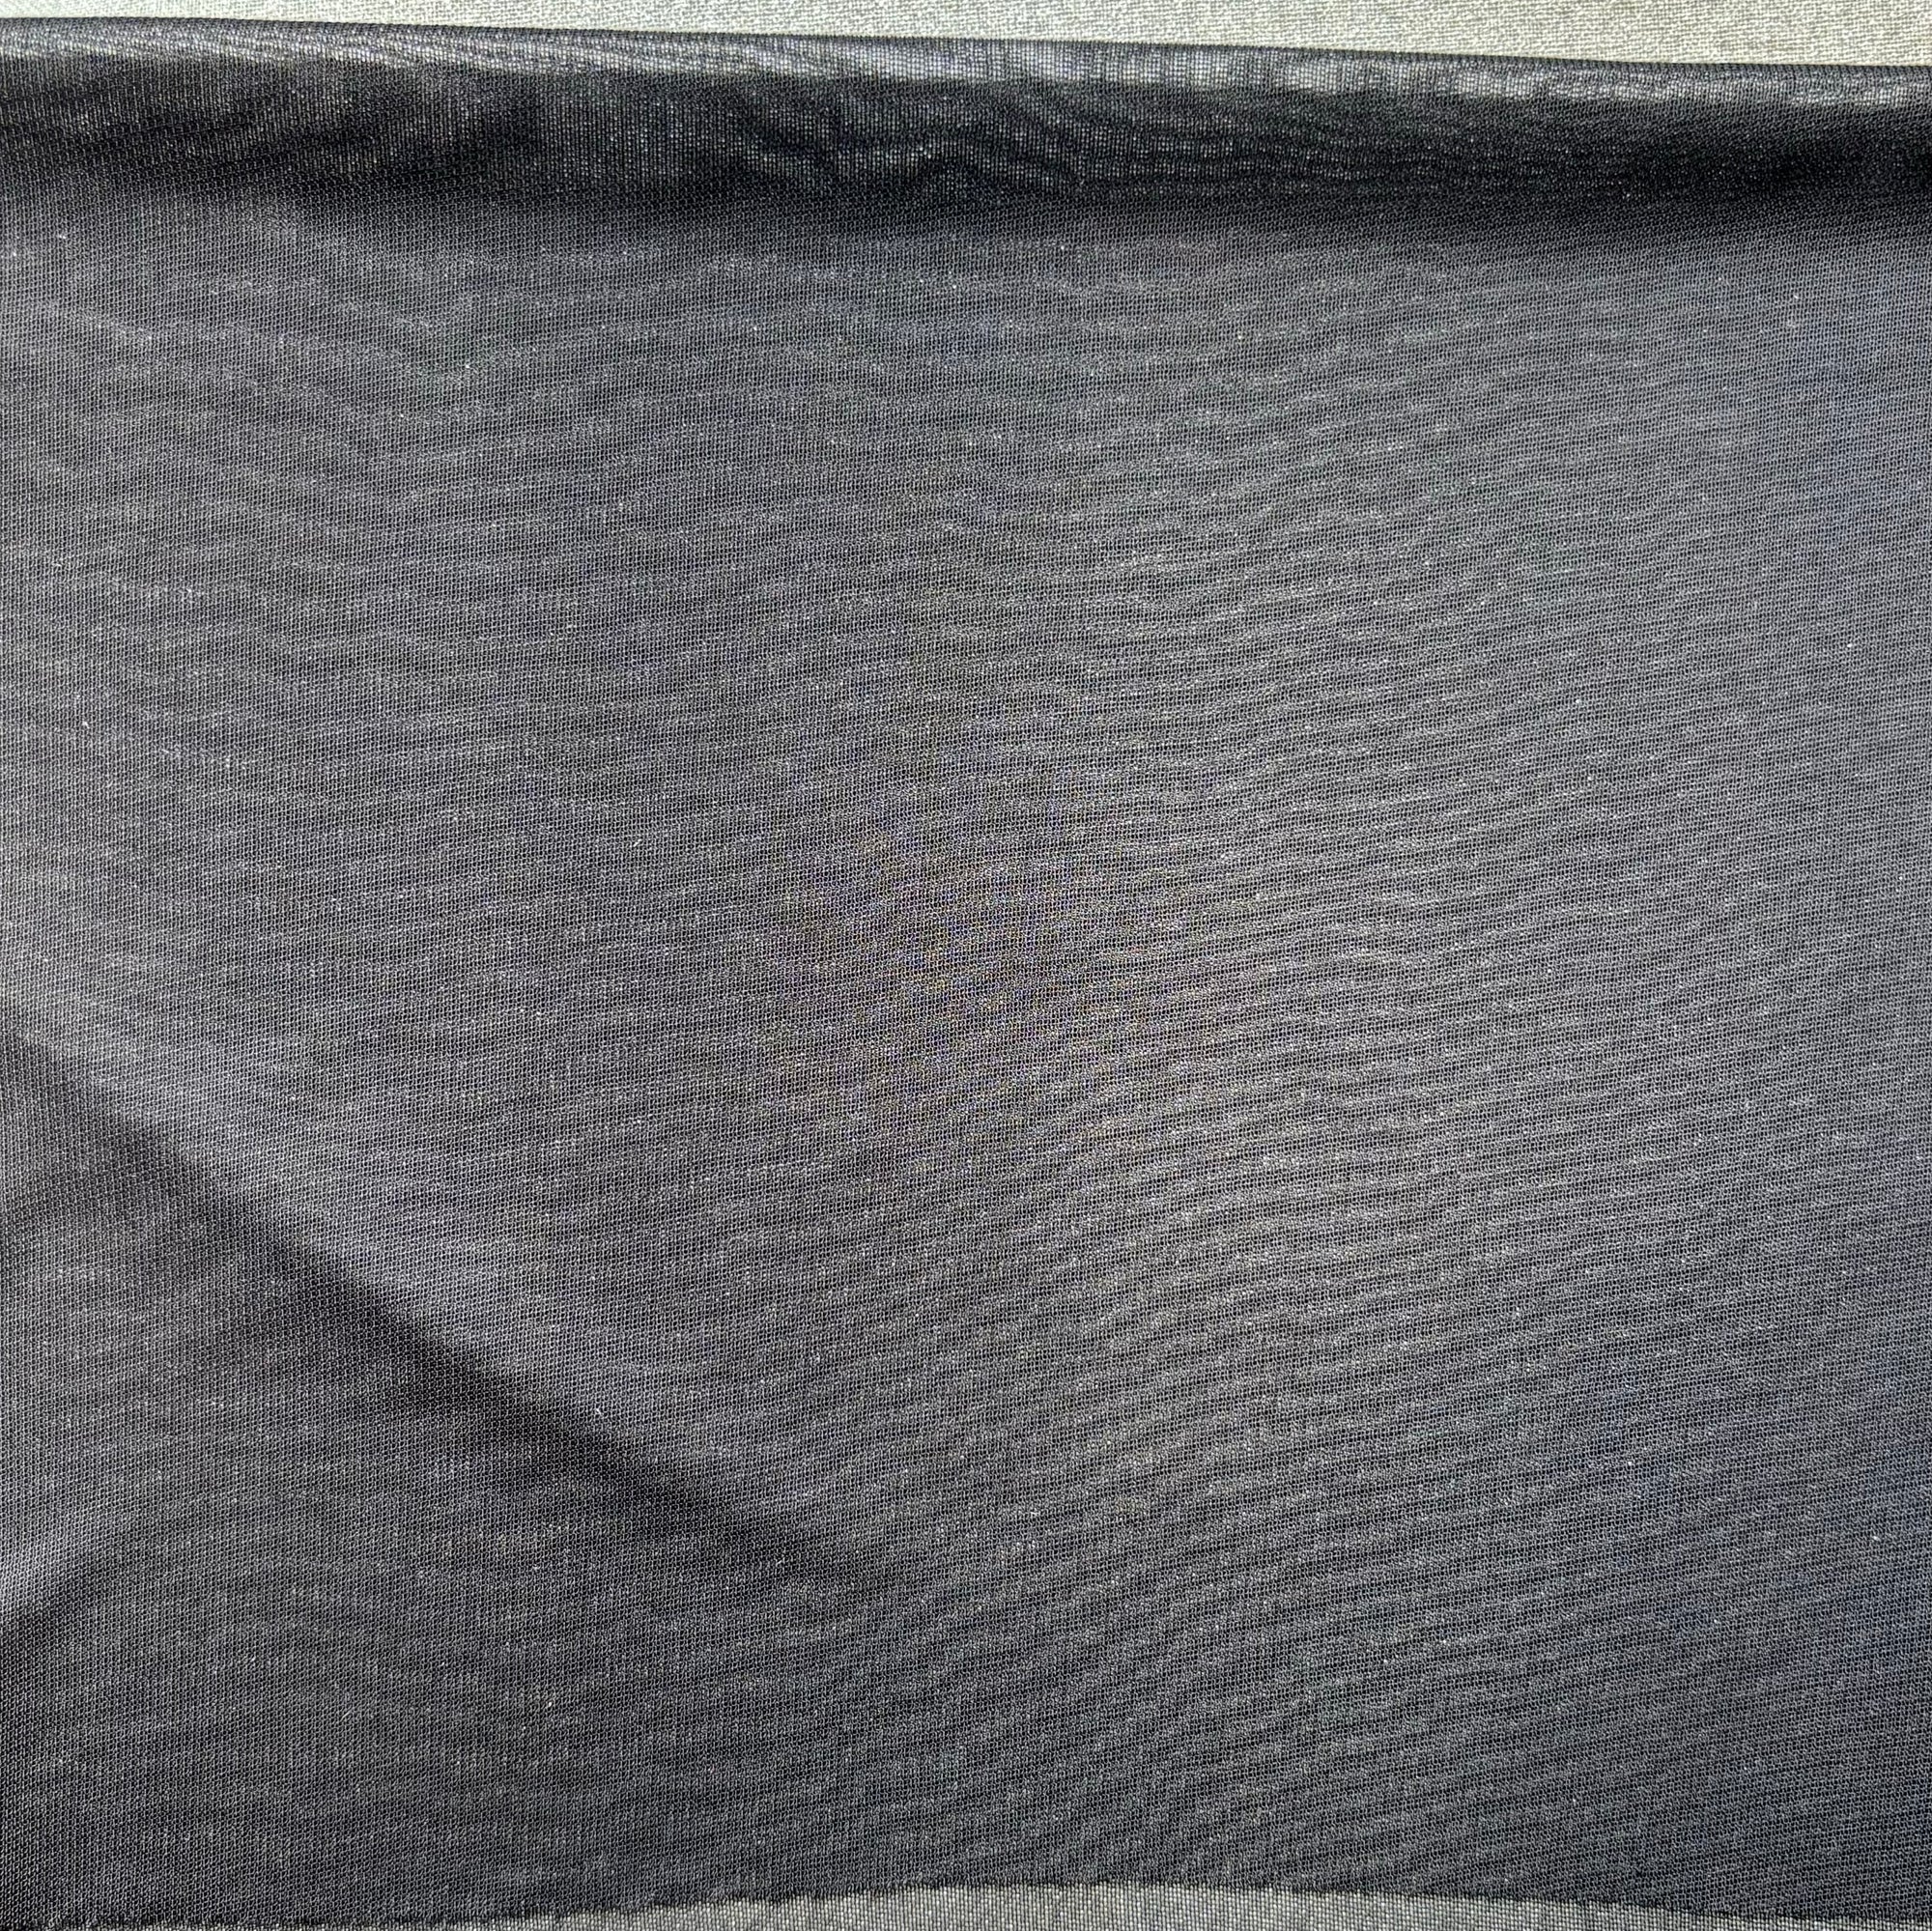 Displaying a fine pure polyester Mesh 